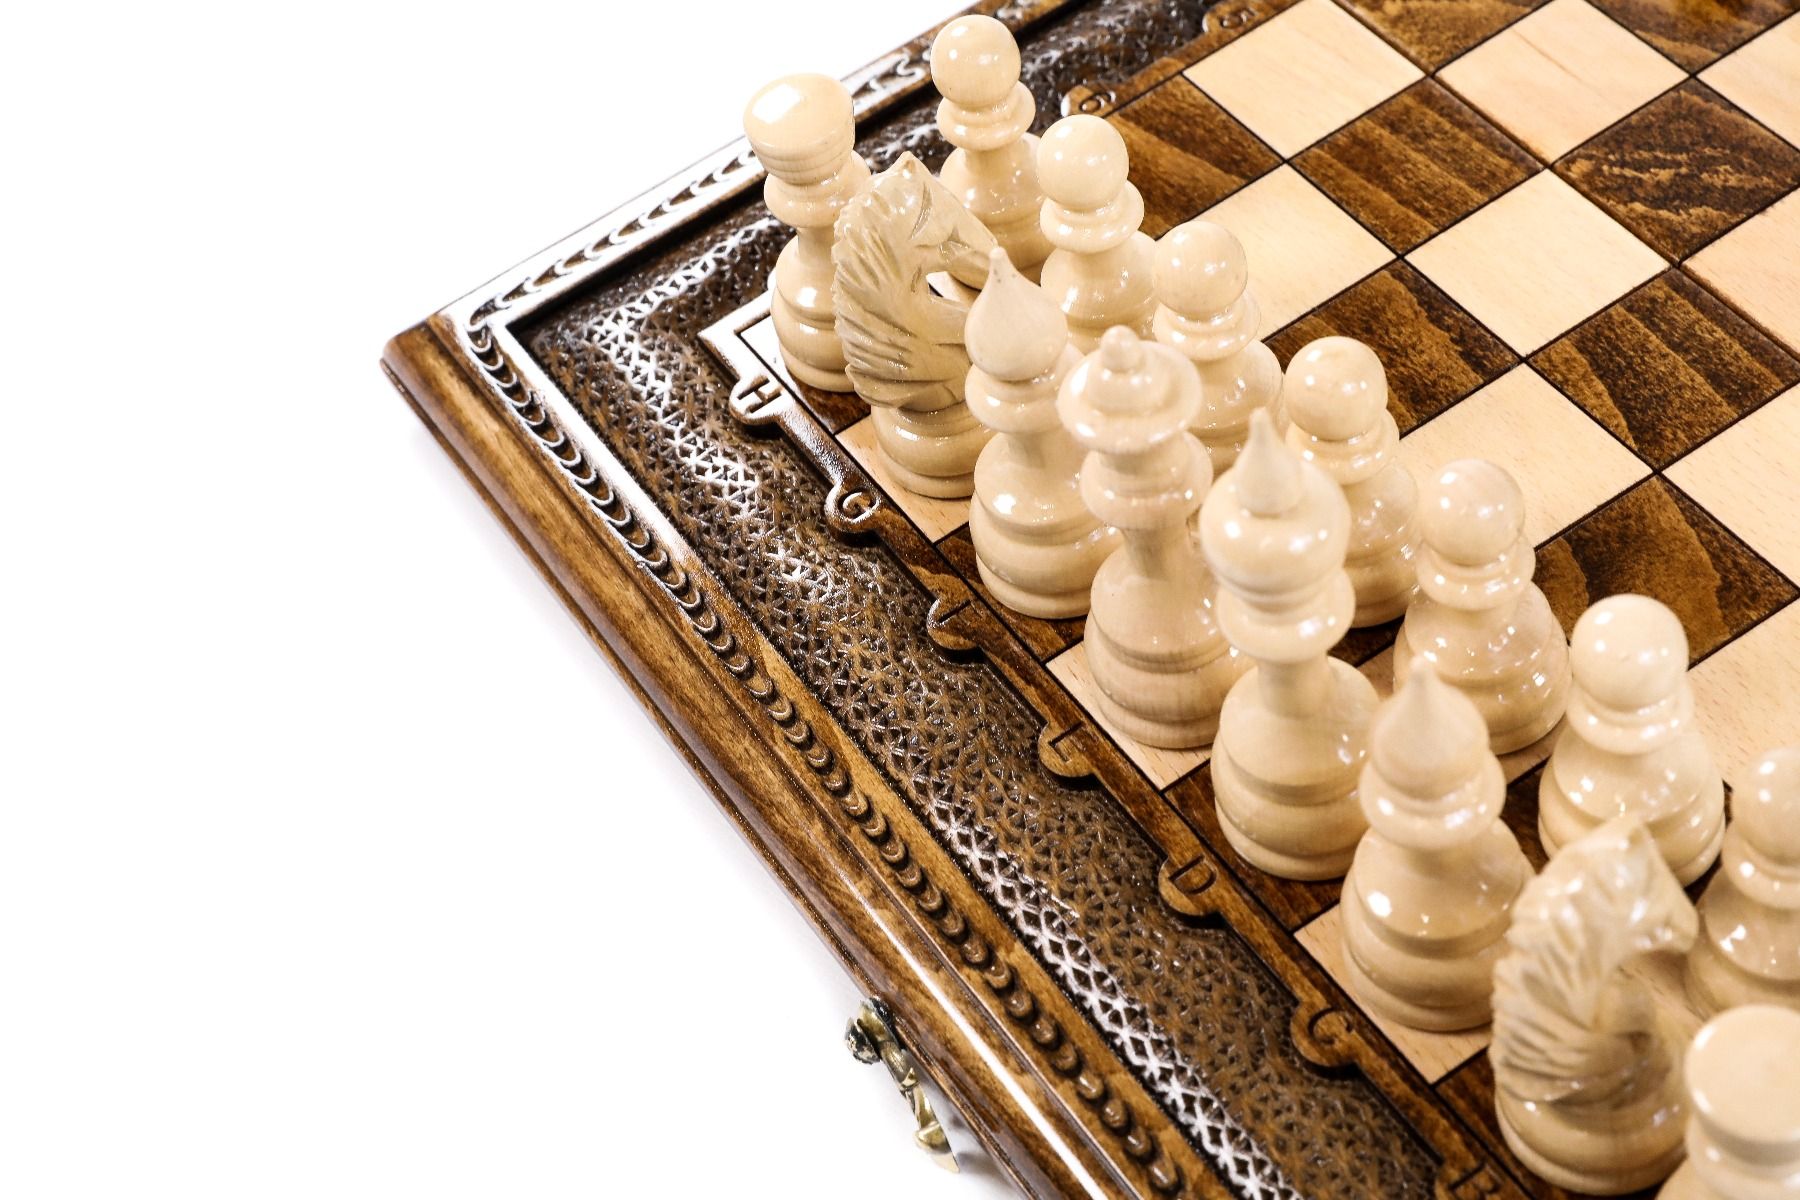 Command the board in style with a handcrafted set that redefines gaming elegance, featuring meticulously carved pieces for chess and backgammon.